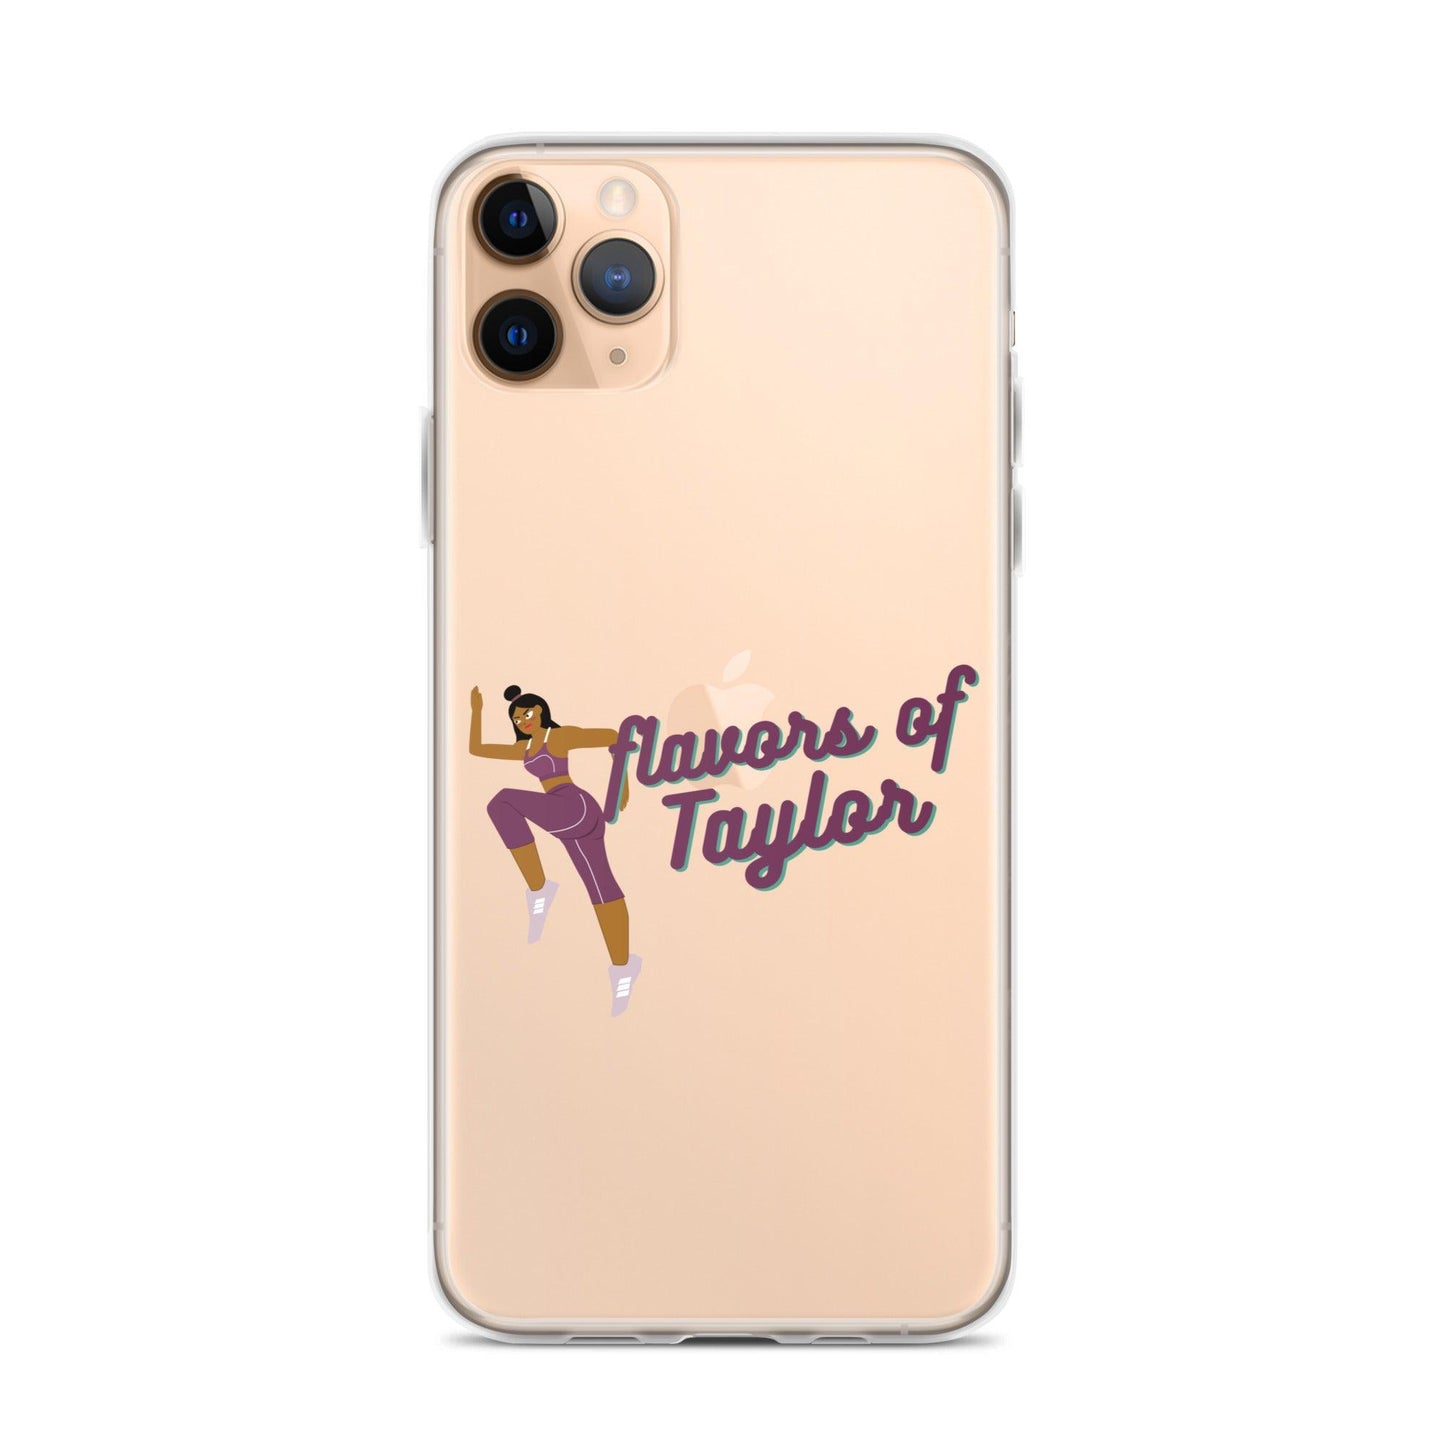 Taylor Anderson "Flavors" iPhone Case - Fan Arch